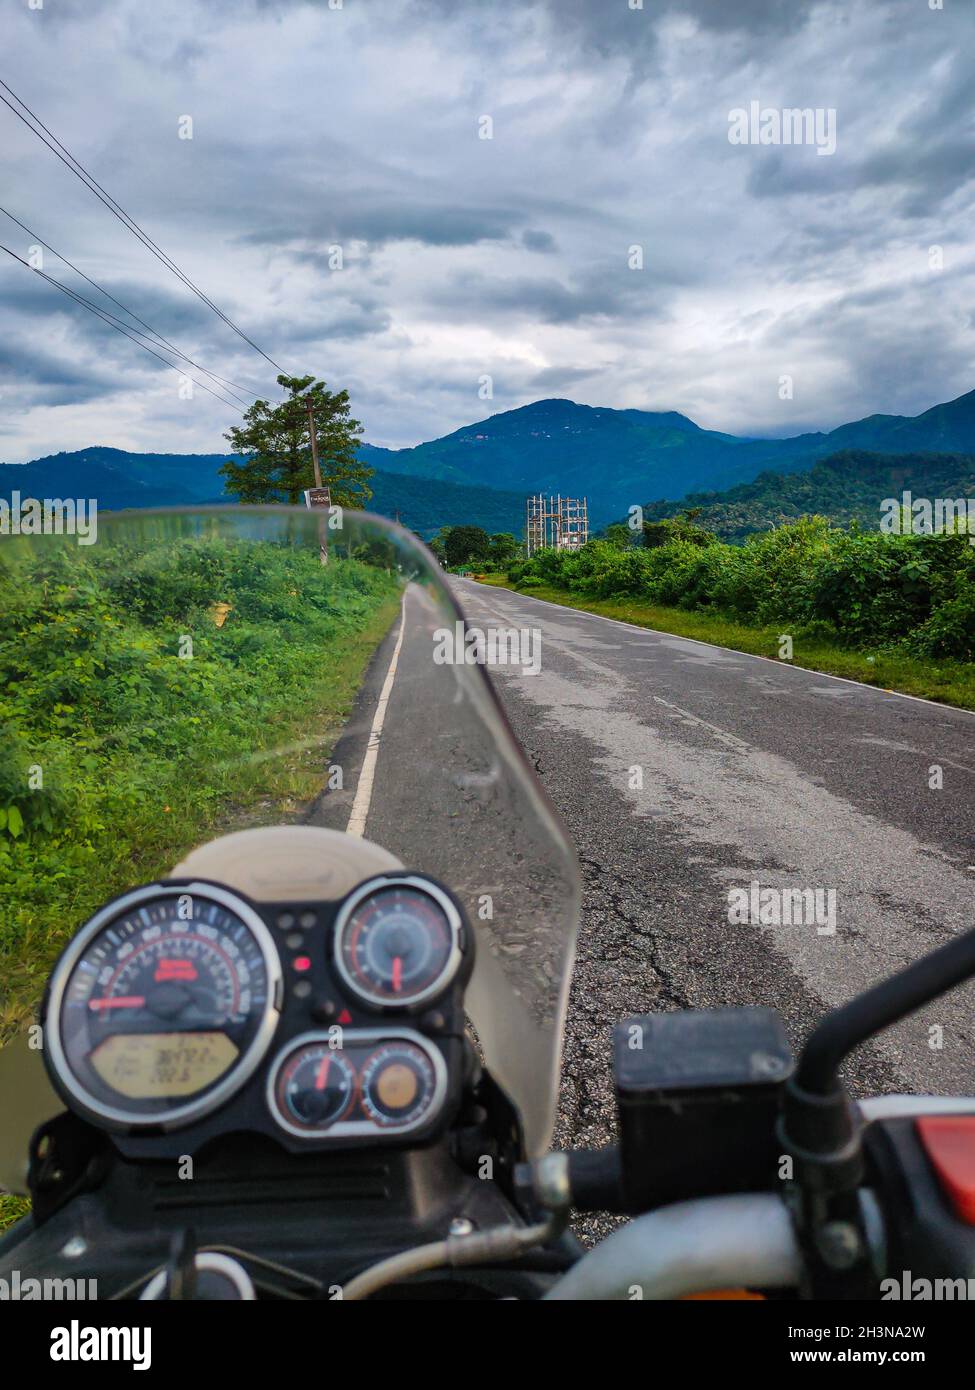 motorcycle front view at tarmac road with mountain view at morning Stock Photo